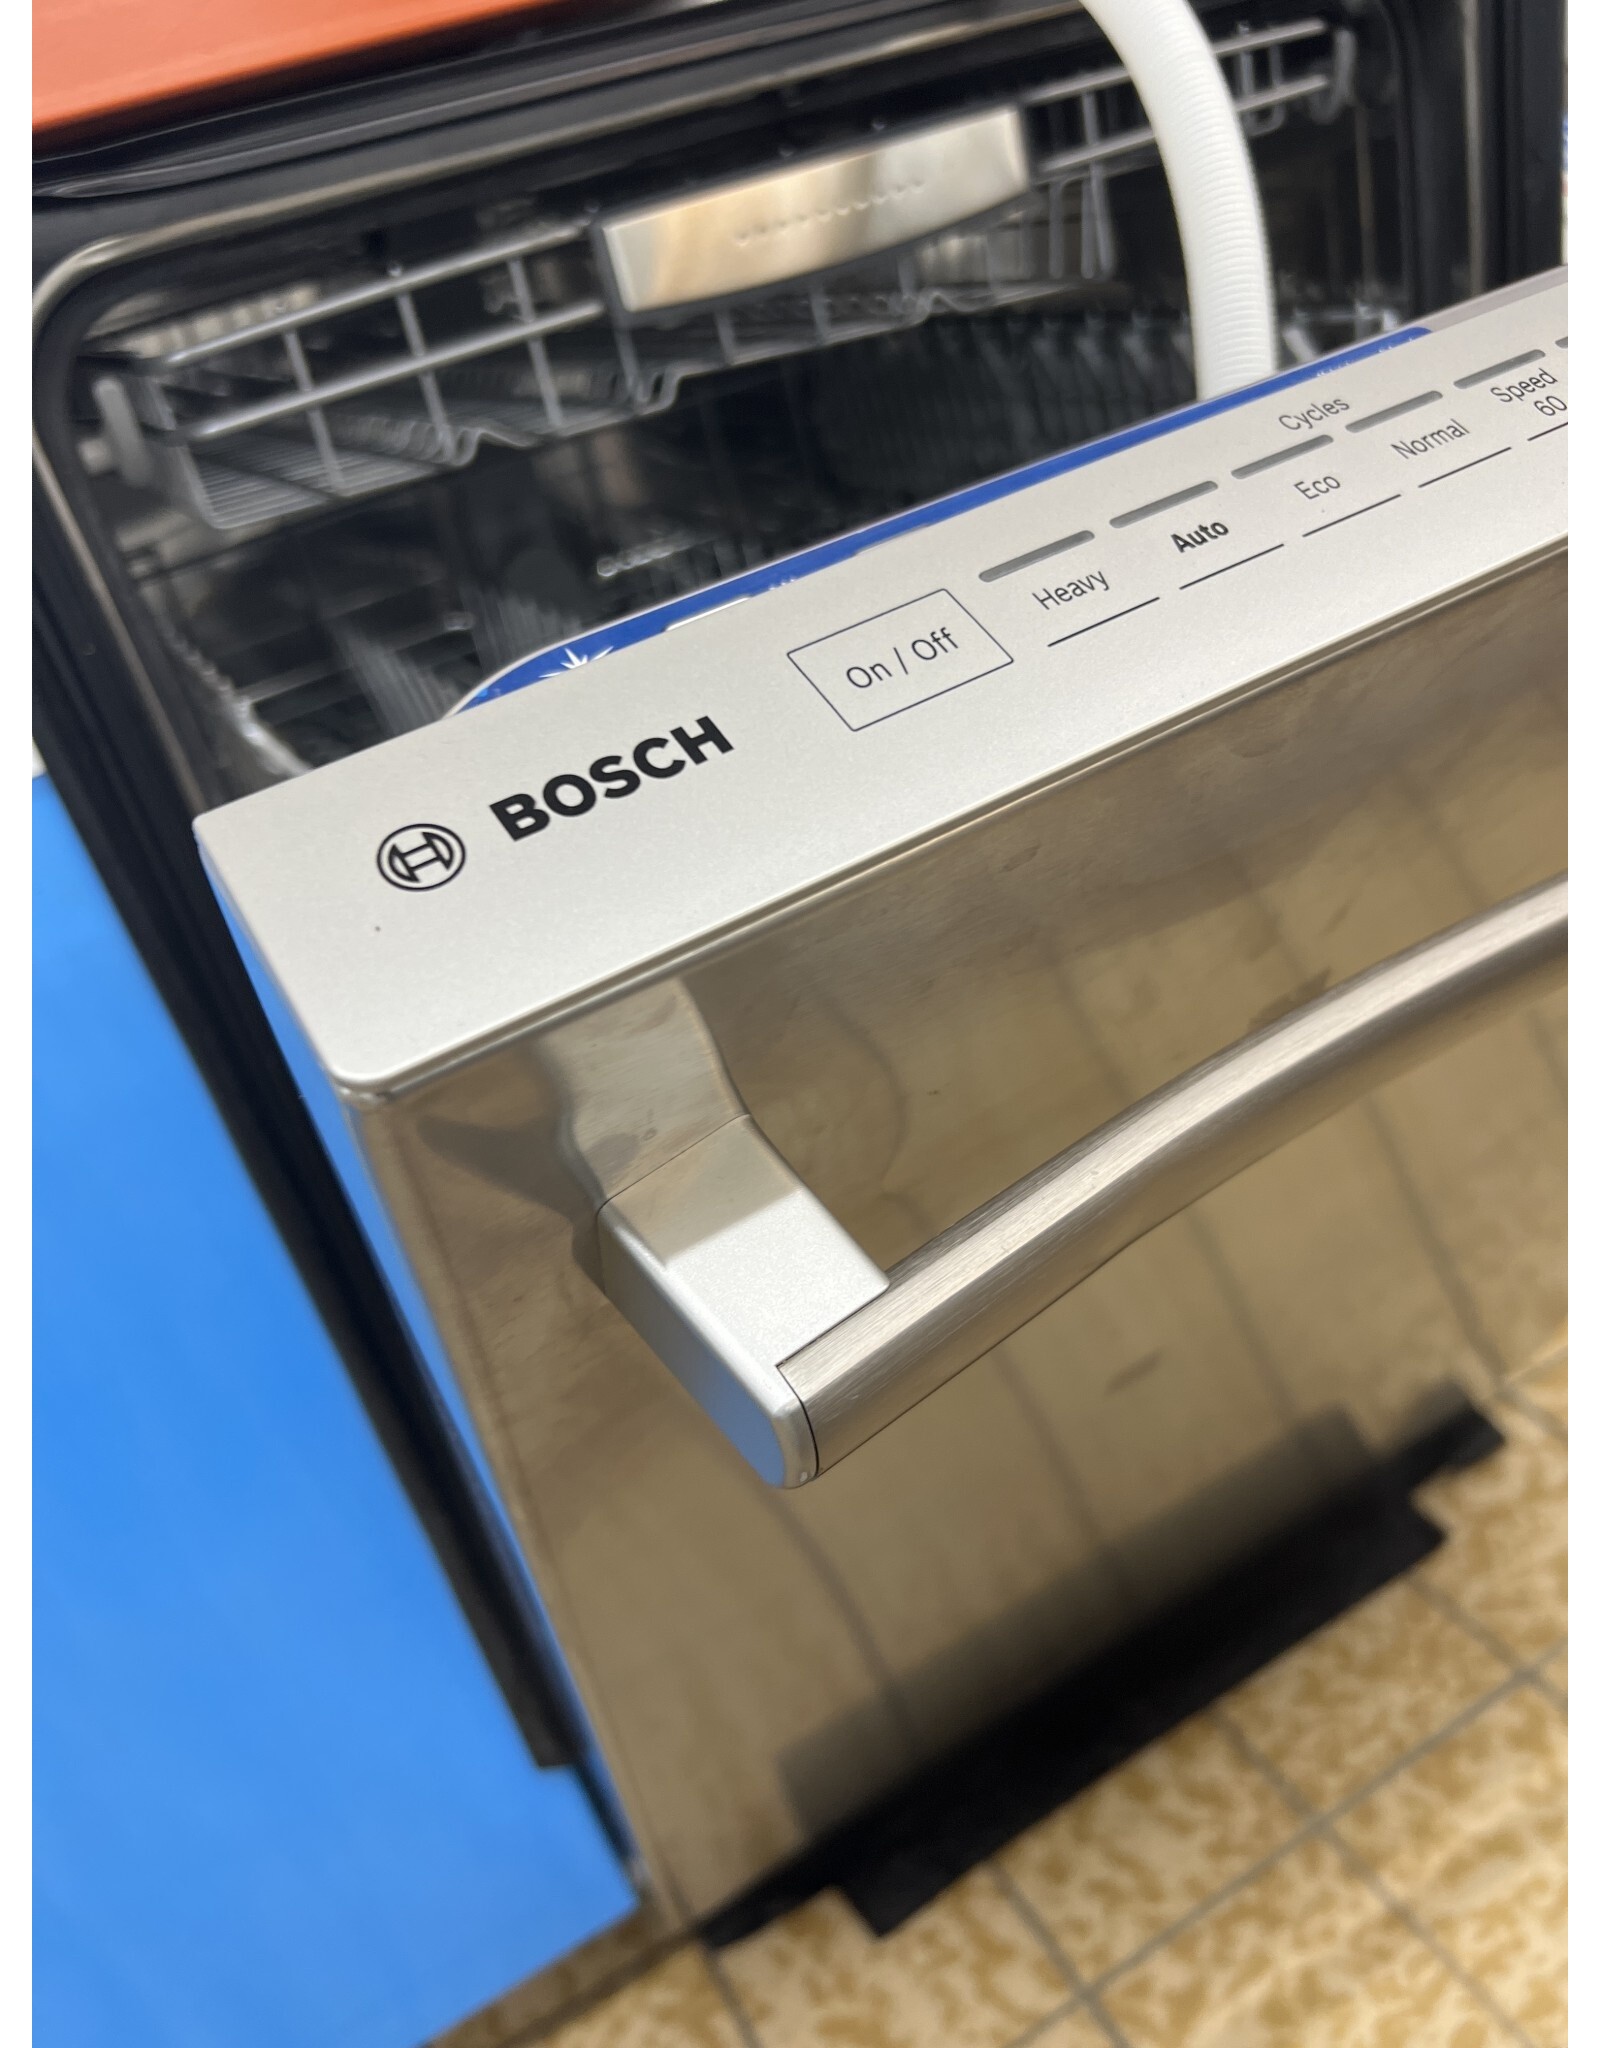 BOSCH Ck. SHXM88Z75N 800 Series 24 in. Stainless Steel Top Control Tall Tub Dishwasher with Stainless Steel Tub, CrystalDry, 40dBA